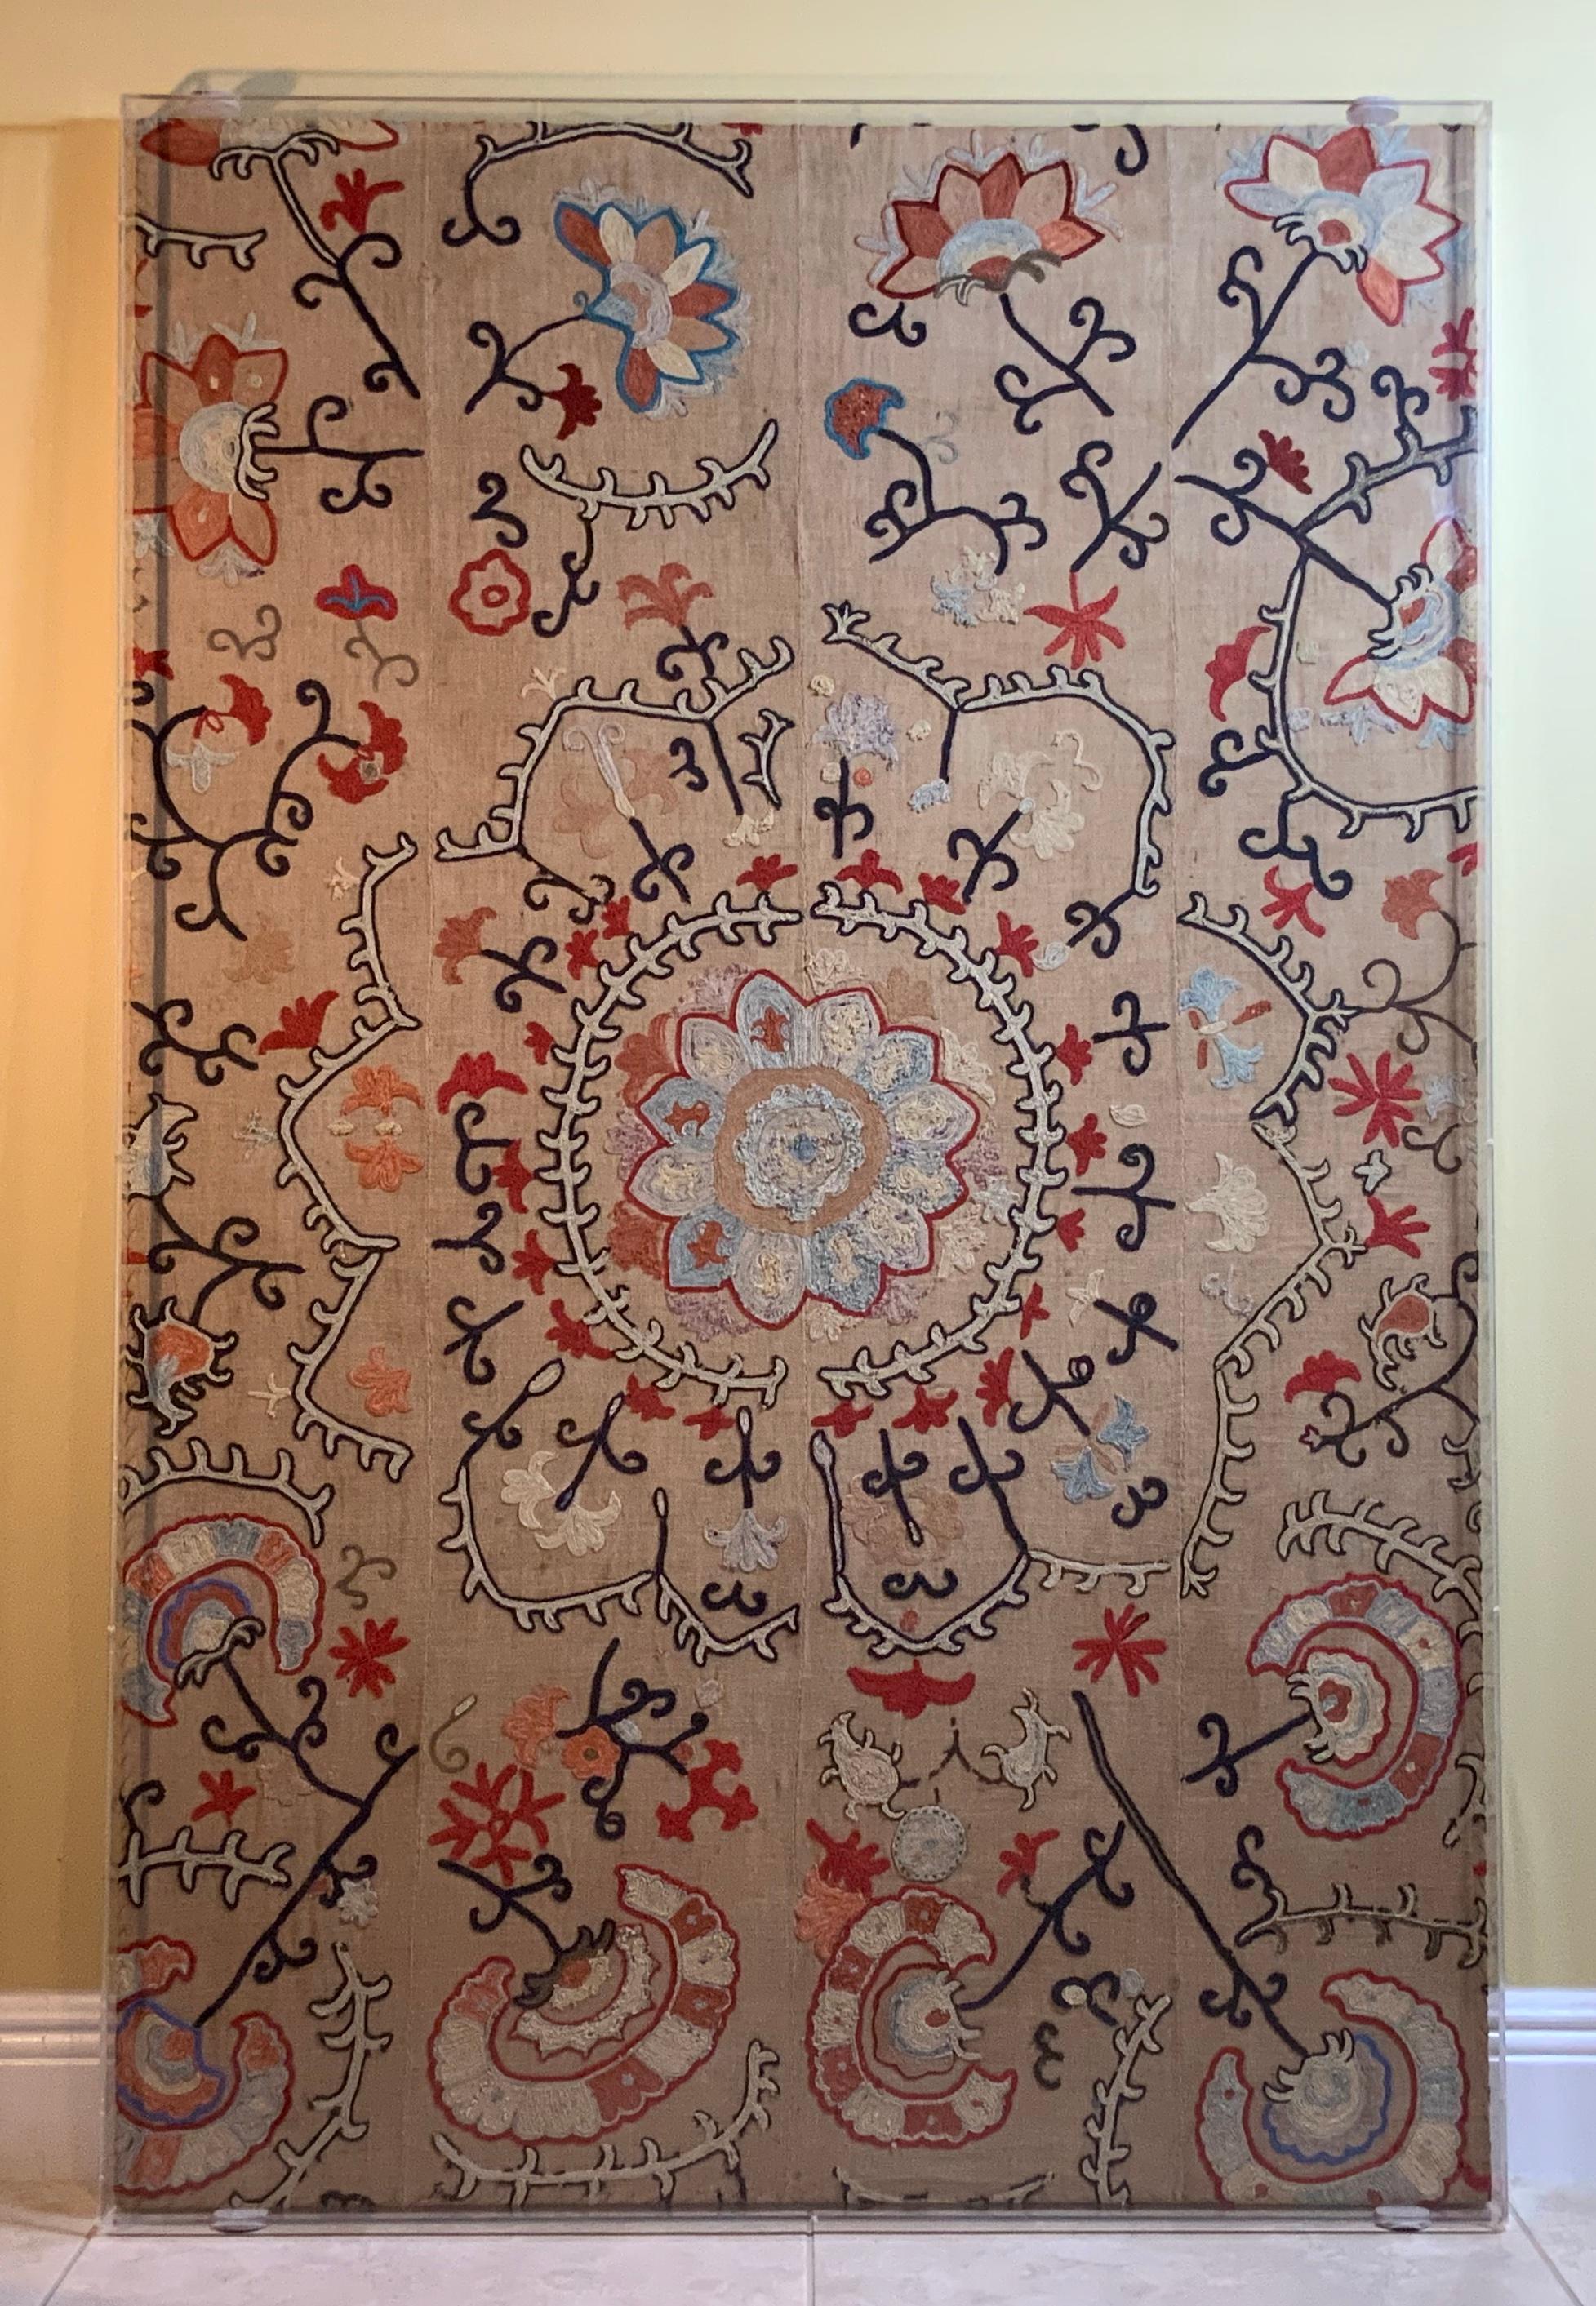 Uzbek Antique Hand Embroidered Suzani Textile Wall Hanging in Lucite Shadow Box